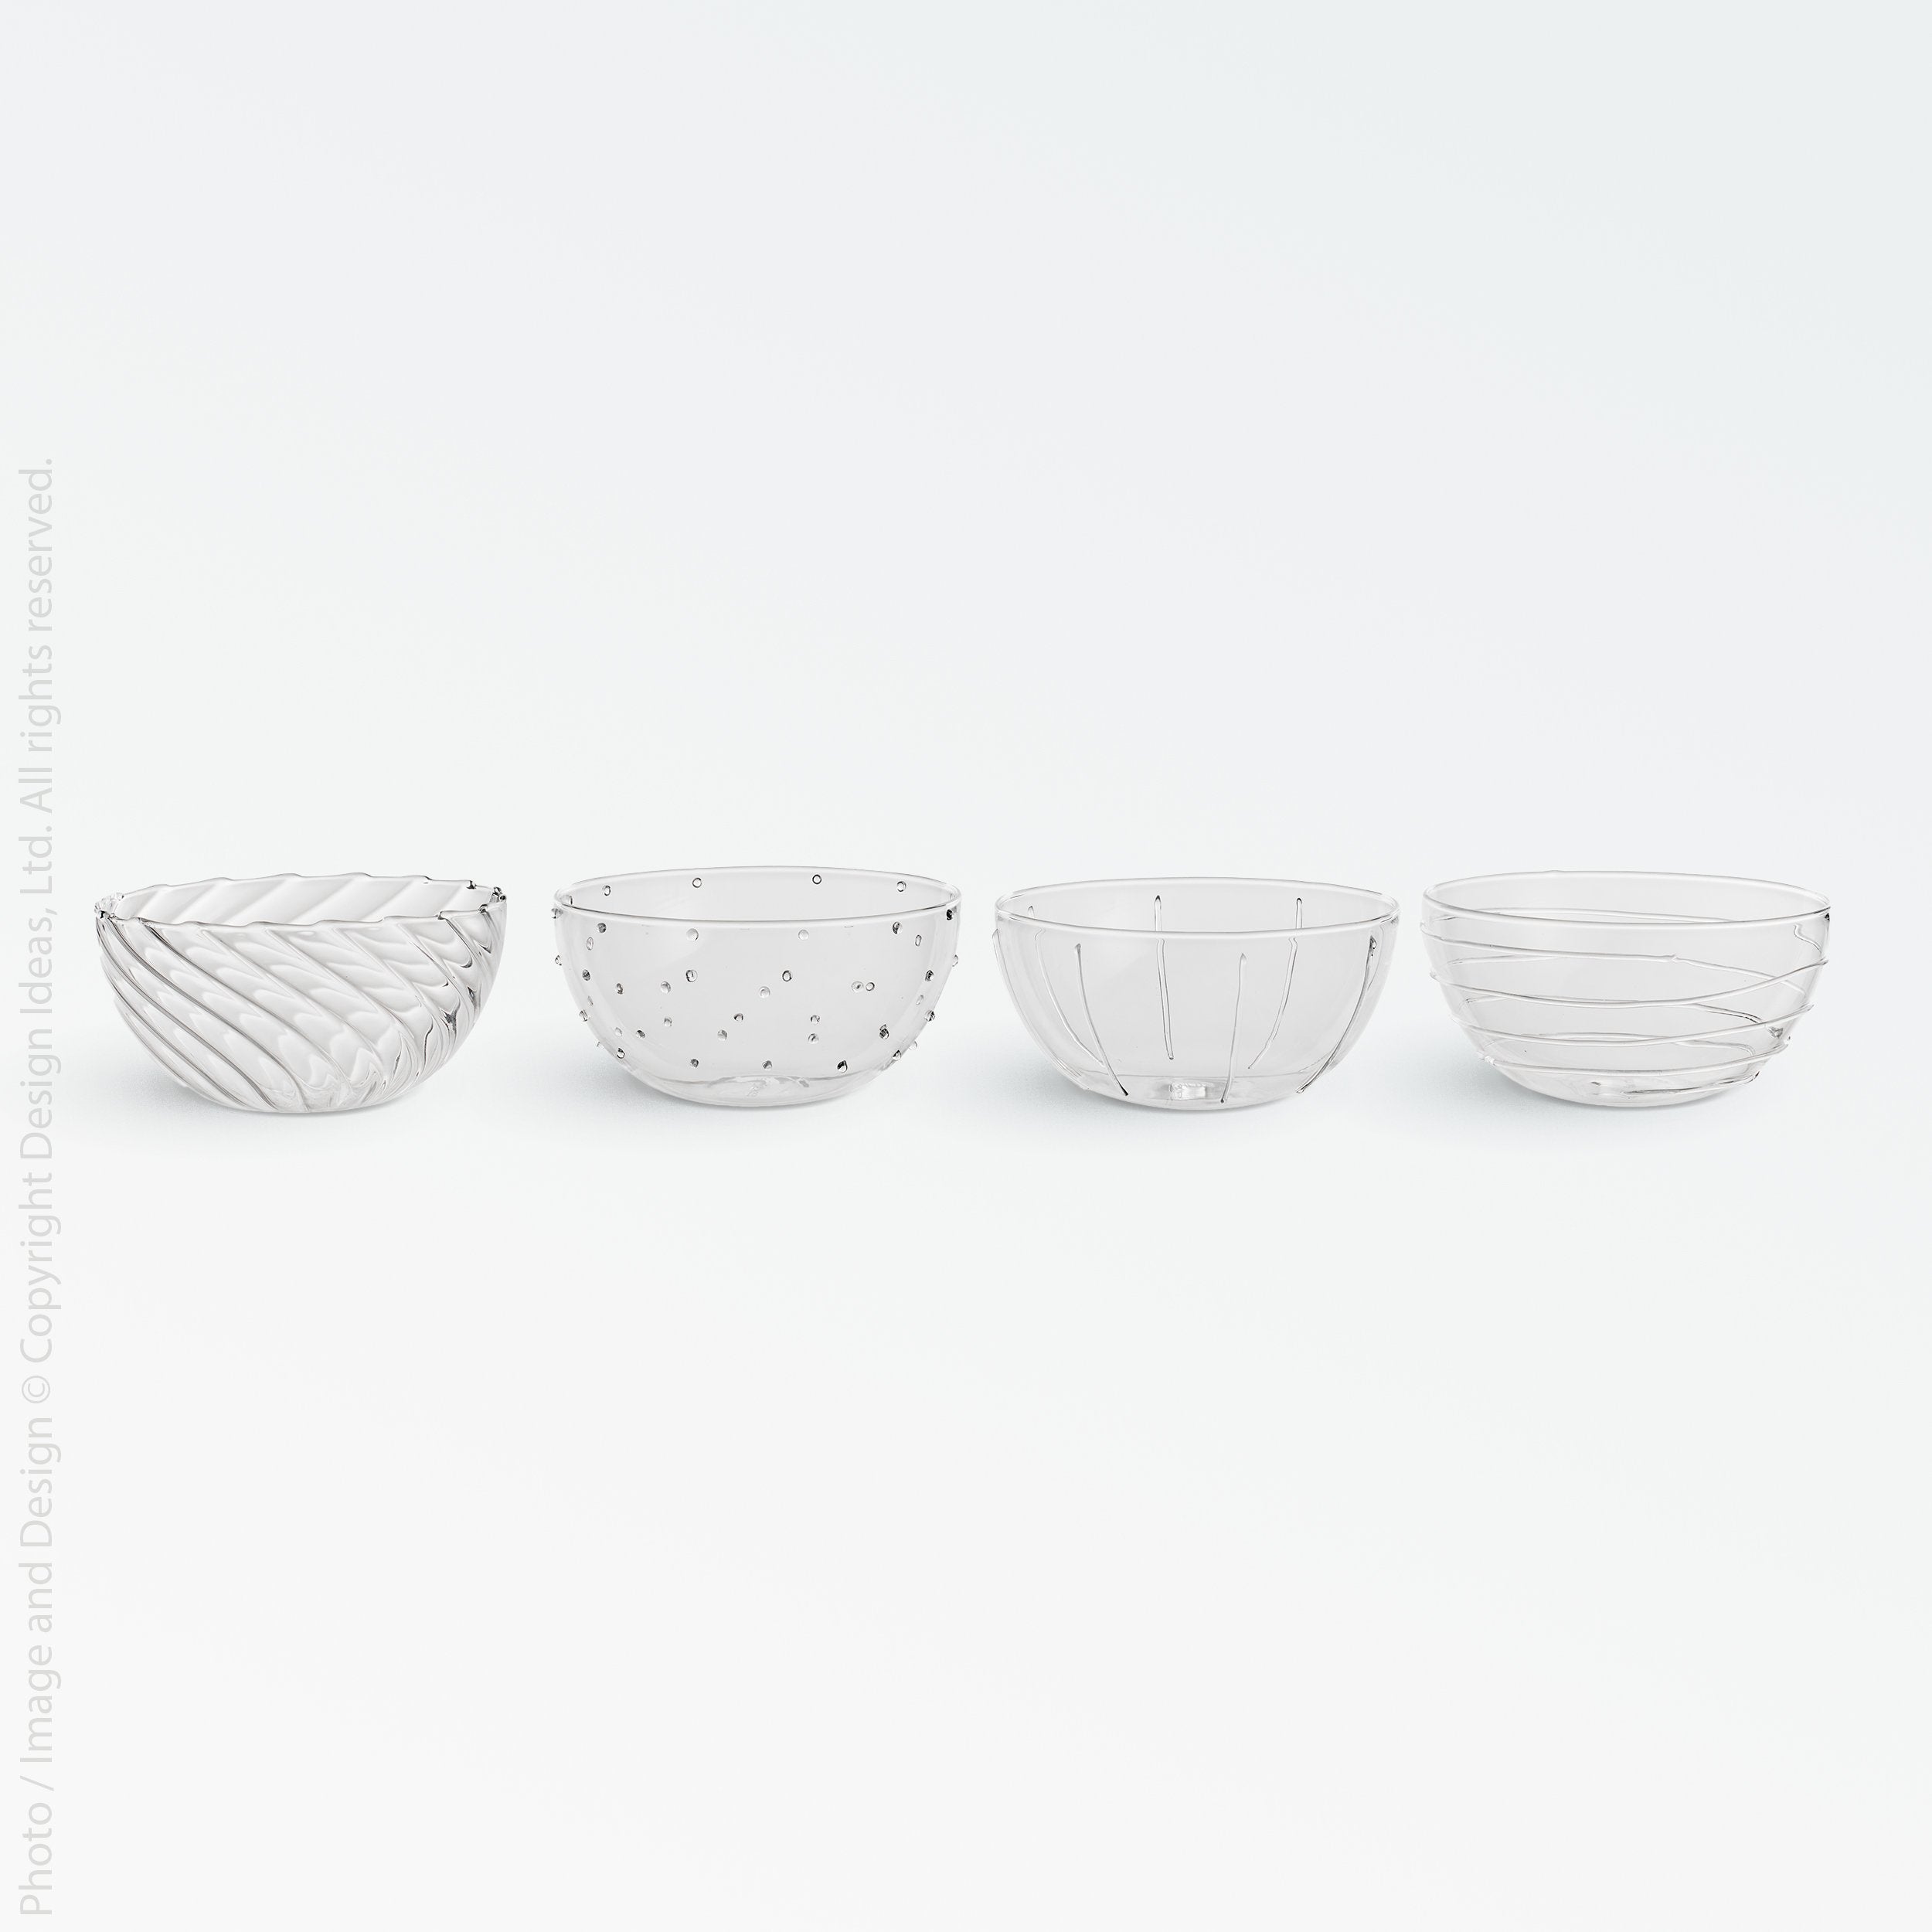 Livenza™ bowls (set of 4) - Clear | Image 1 | Premium Bowl from the Livenza collection | made with Borosilicate Glass for long lasting use | texxture